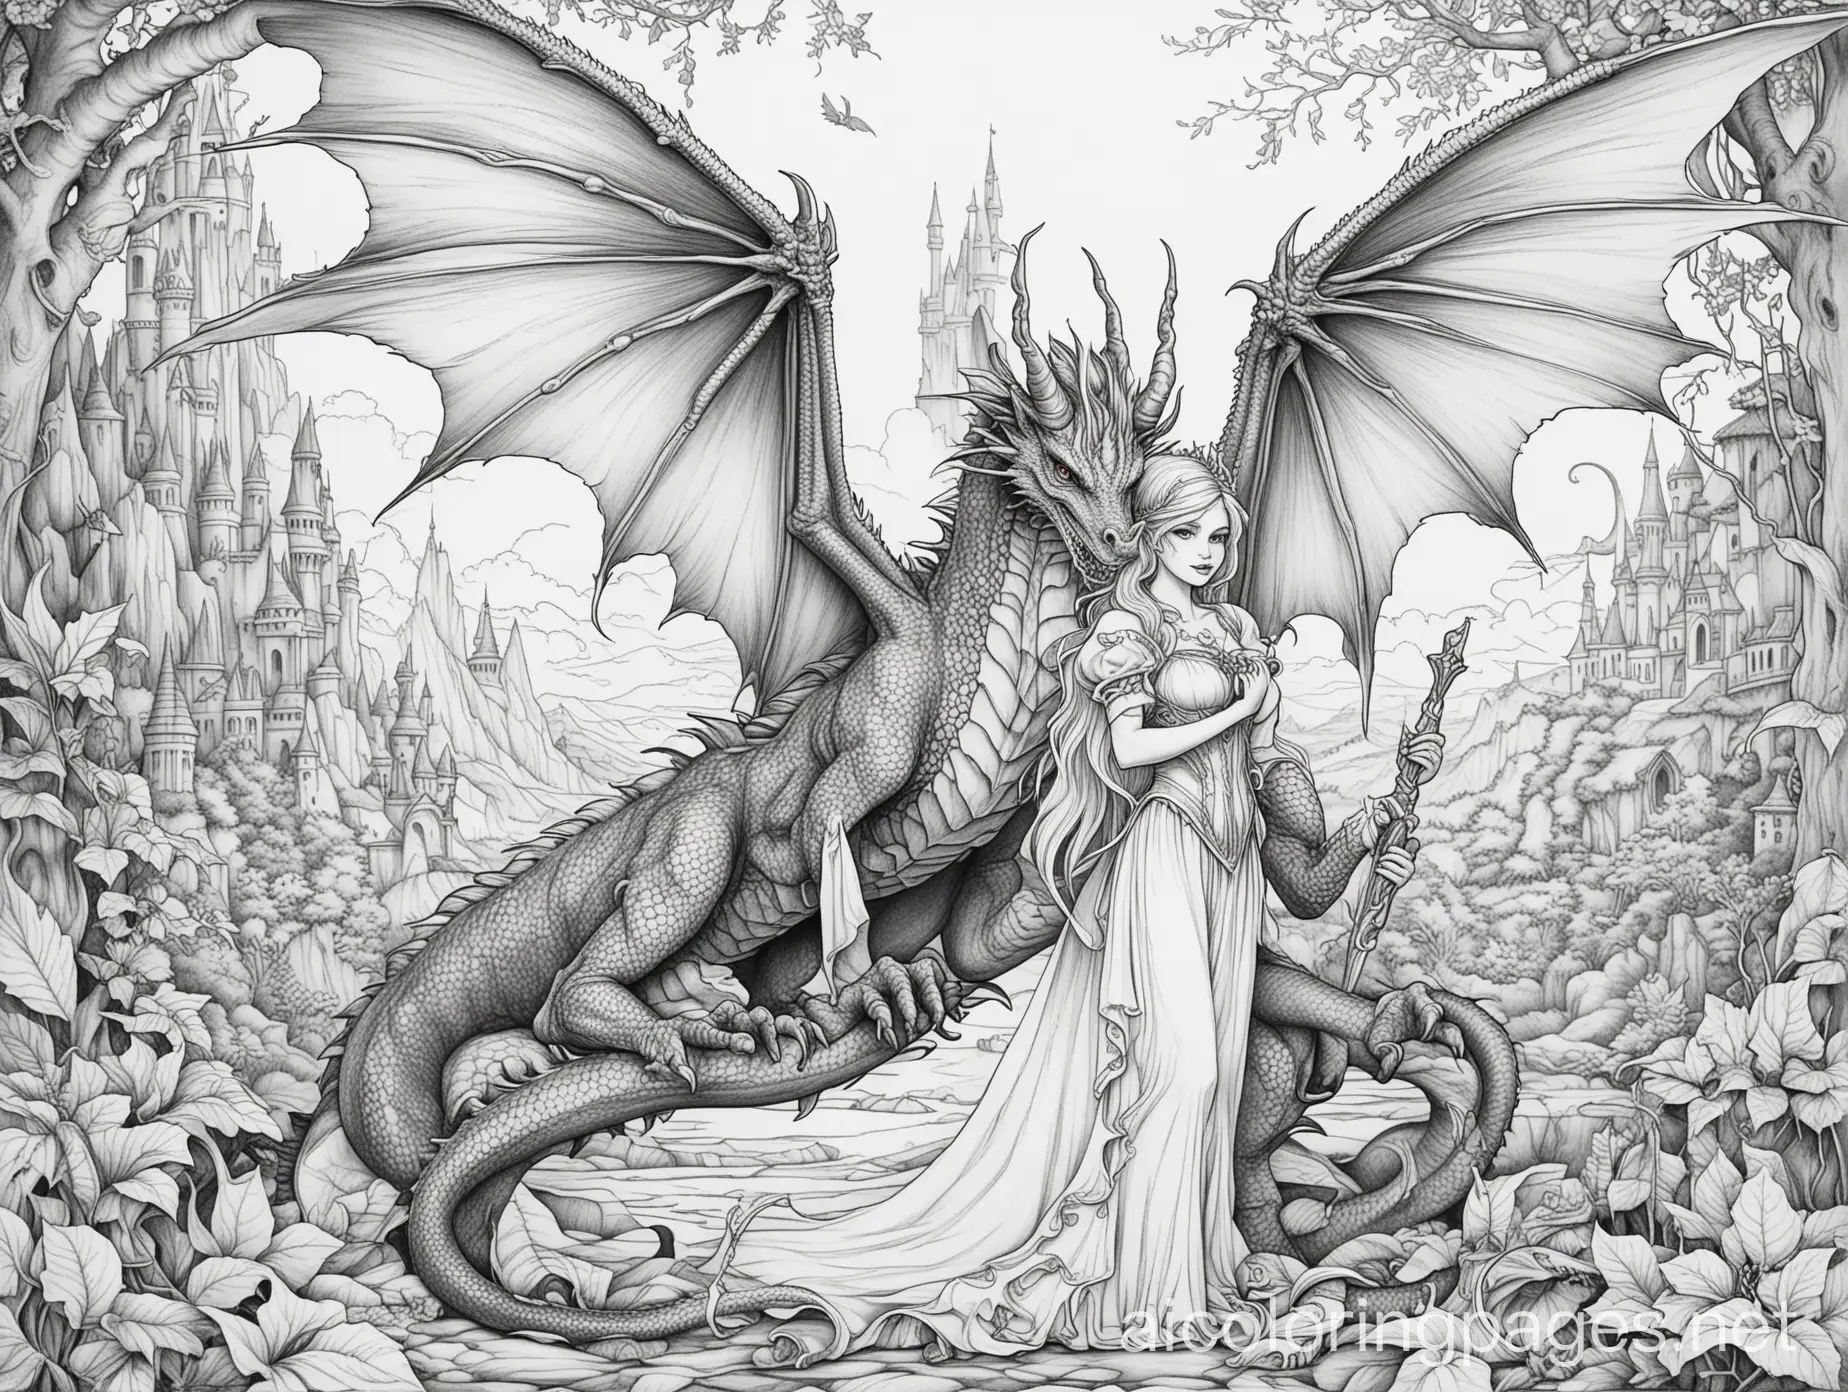 Wicked-Fairy-and-Dragon-Scene-Coloring-Page-for-Adults-Intricate-Line-Art-on-White-Background